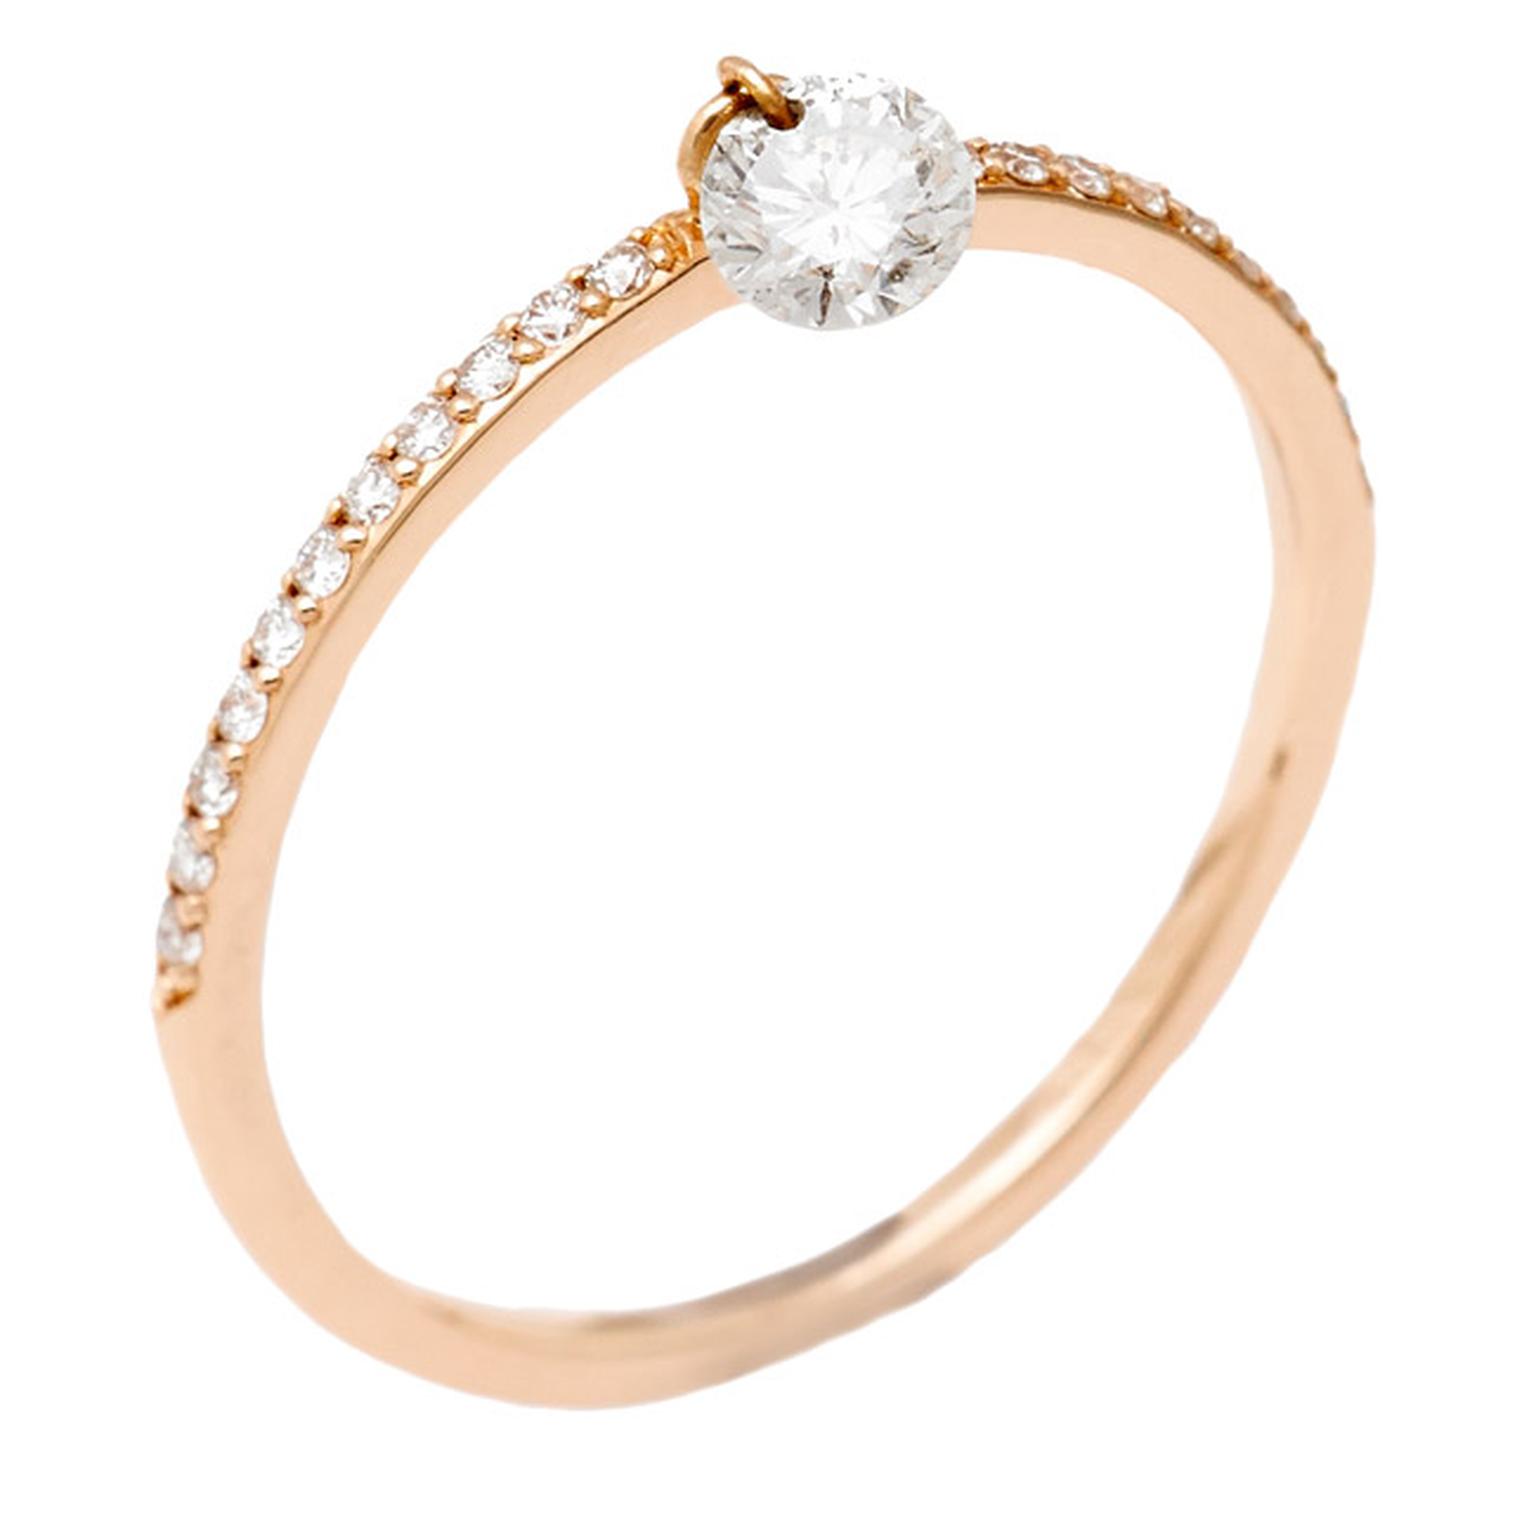 Raphael-Canot-Set-Free-Ring-in-Pink-Gold-Main